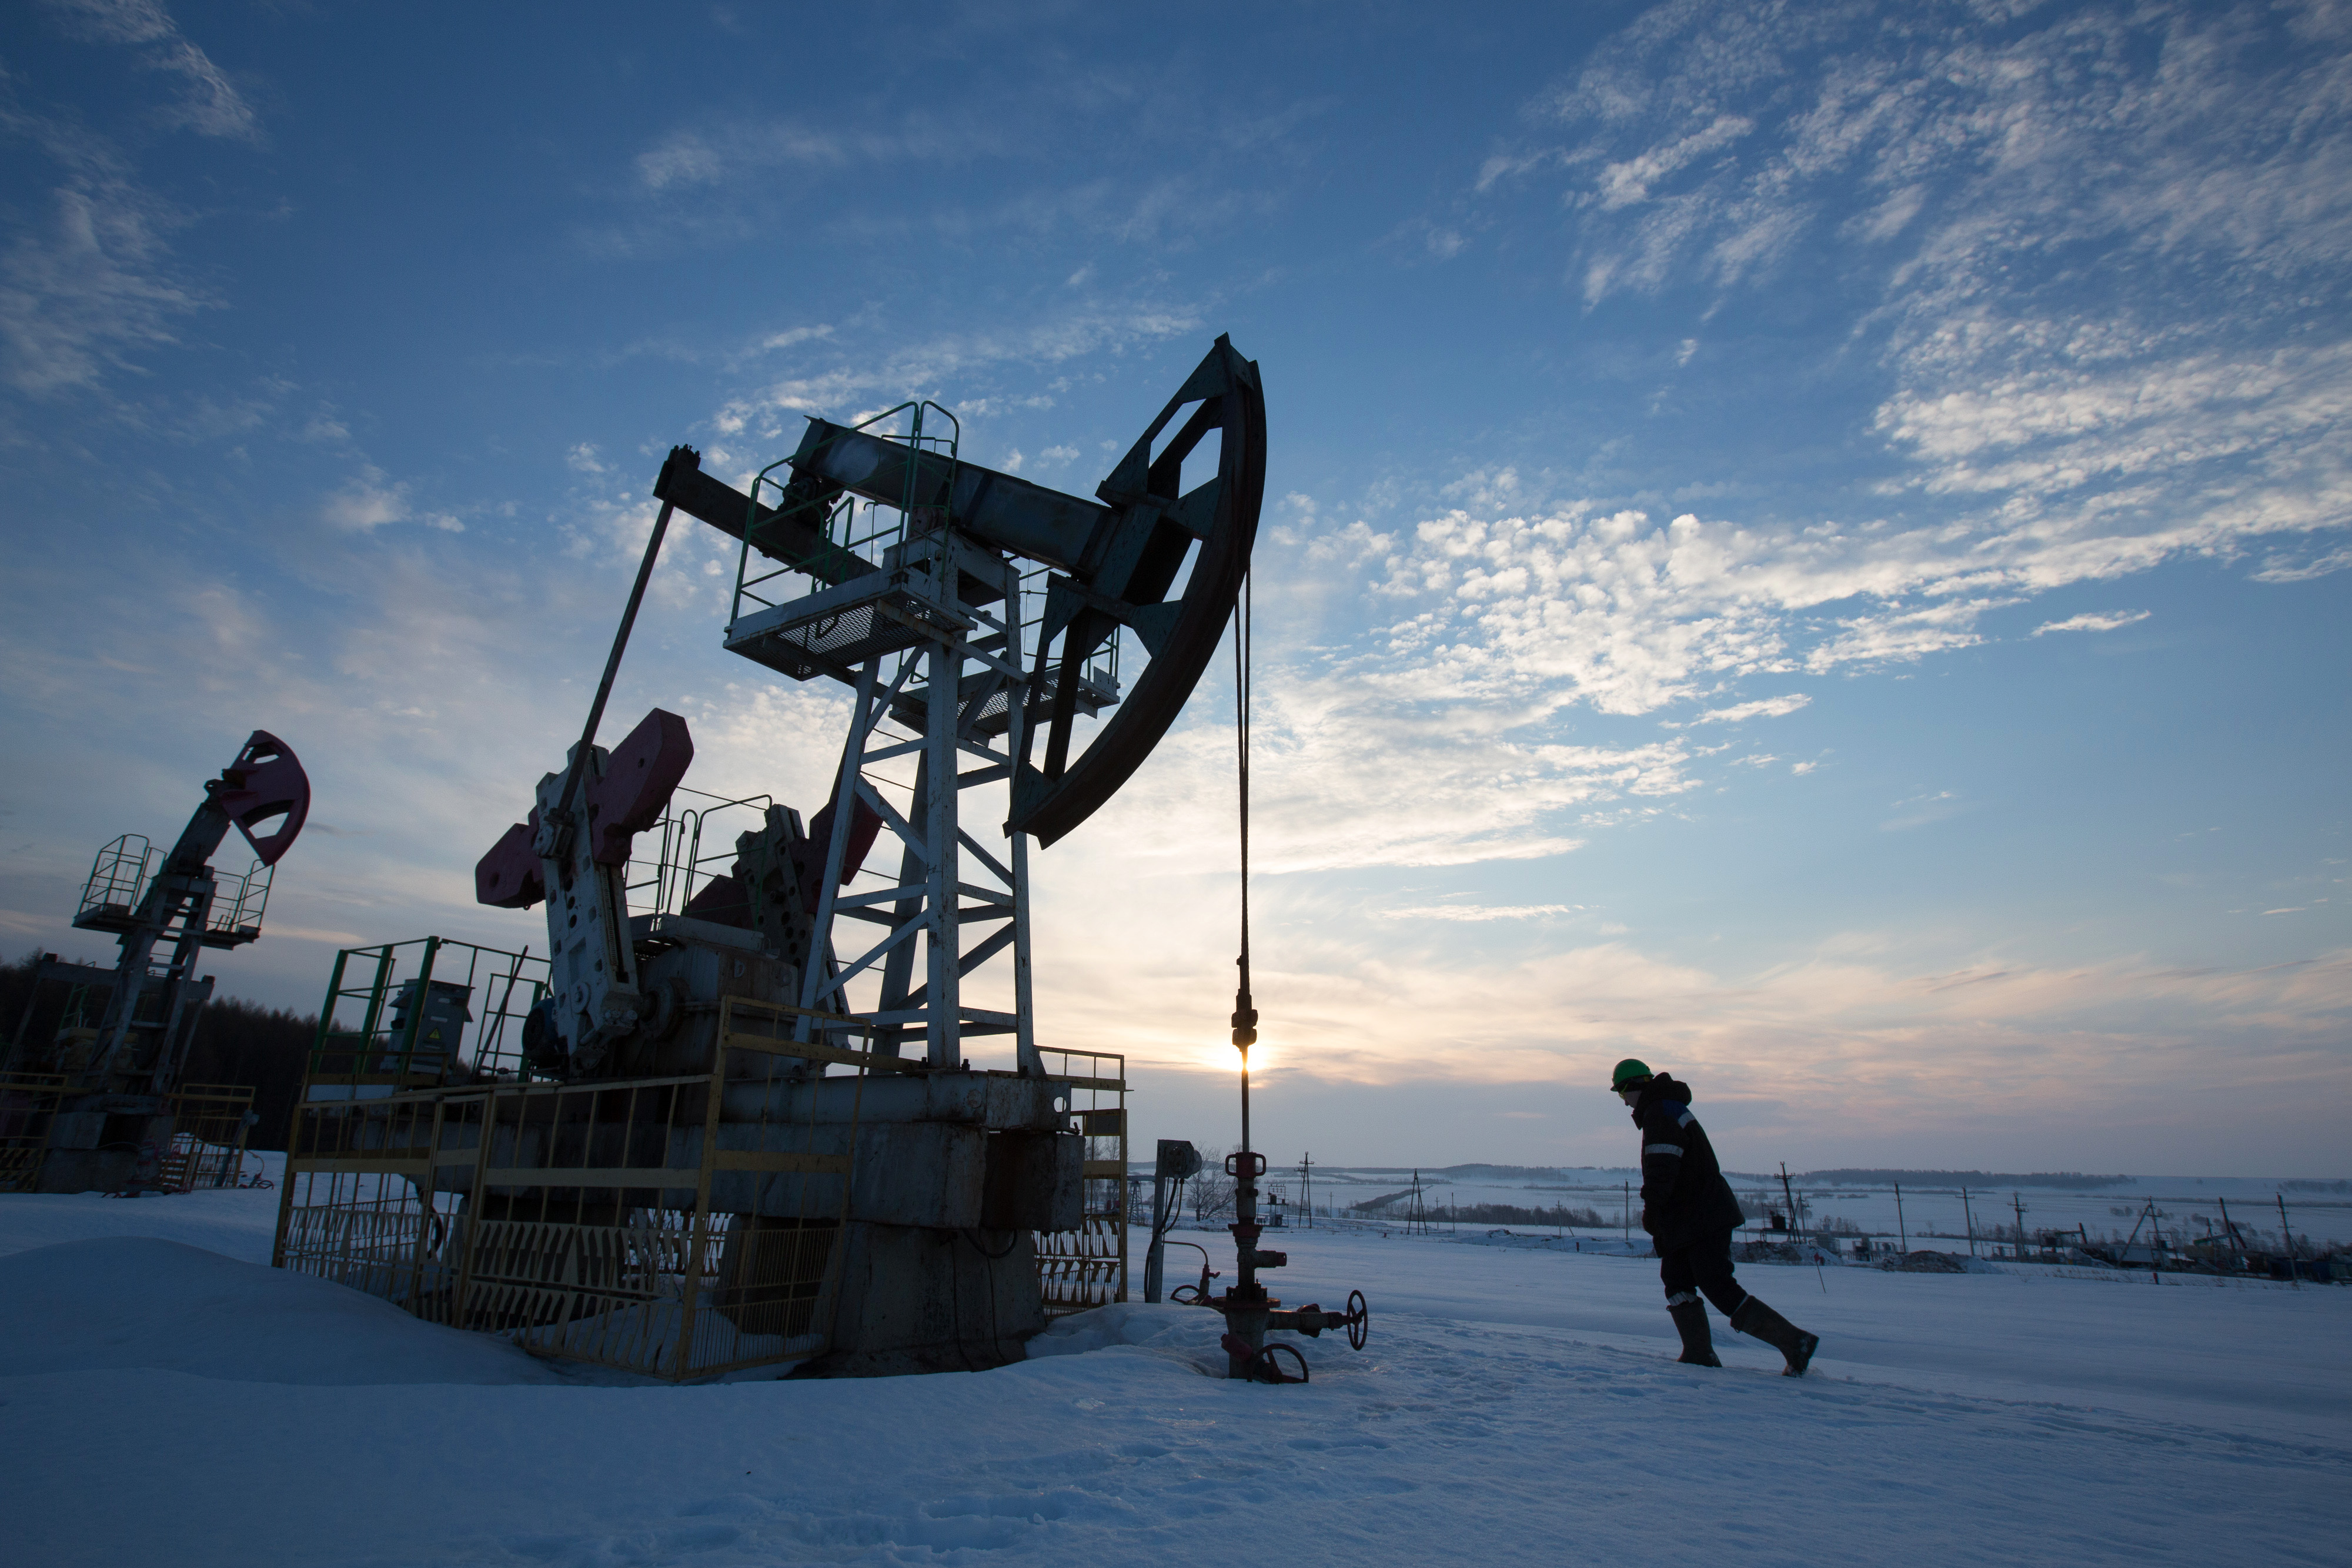 An oil worker inspects a pumping jack, also known as a 'nodding donkey,' during drilling operations in an oilfield operated by Bashneft PAO in the village of Otrada, 150kms from Ufa, Russia, on Saturday, March 5, 2016. (Andrey Rudakov—Bloomberg / Getty Images)